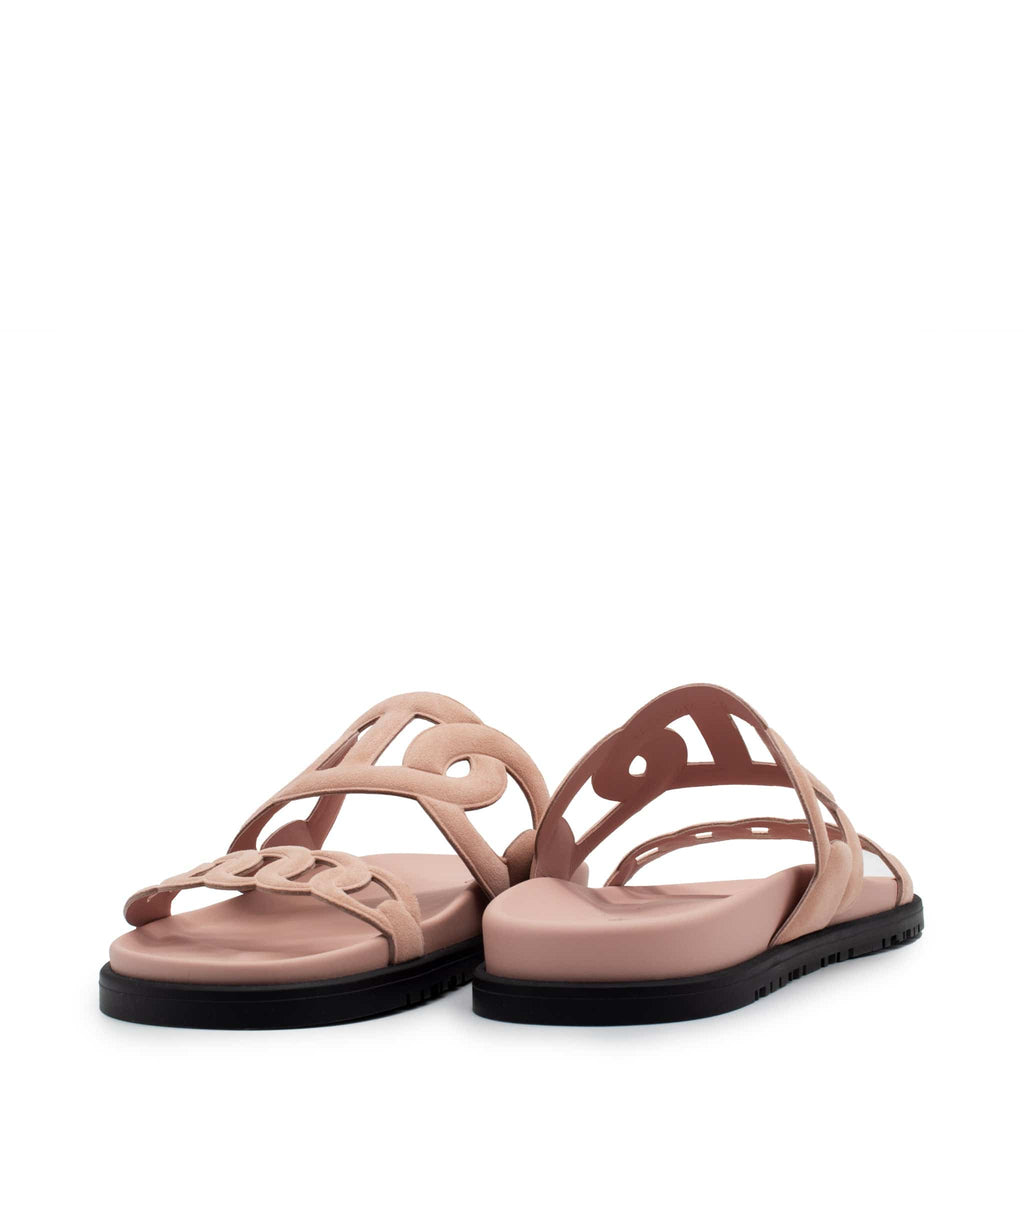 Authentic Hermes Aloha Sandals 36, Women's Fashion, Footwear, Sandals on  Carousell